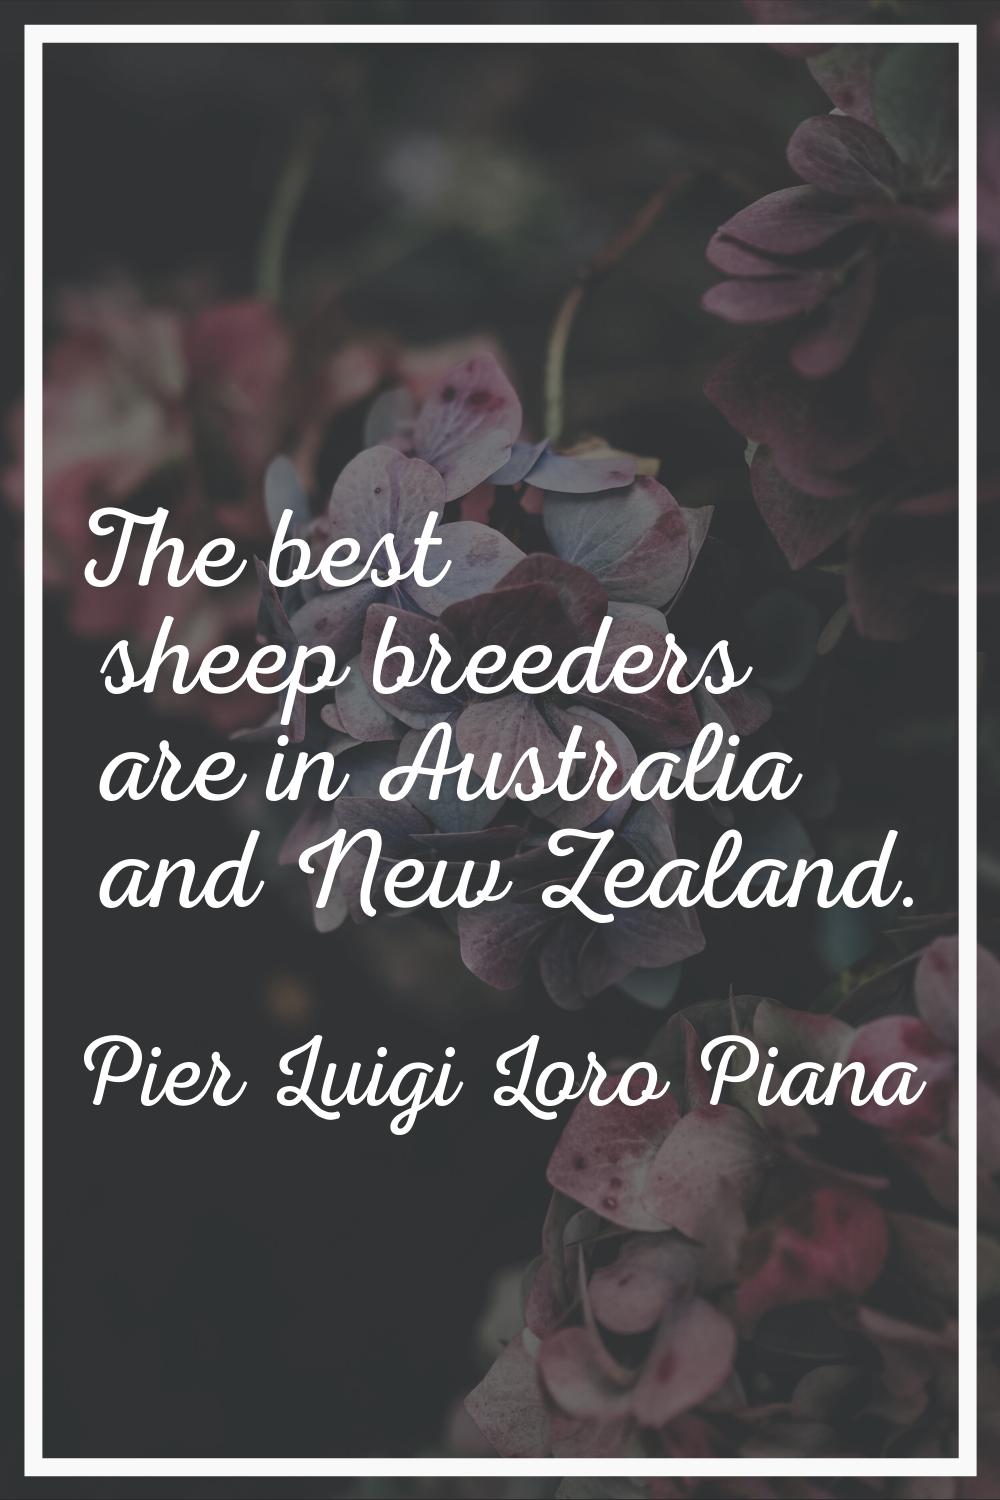 The best sheep breeders are in Australia and New Zealand.